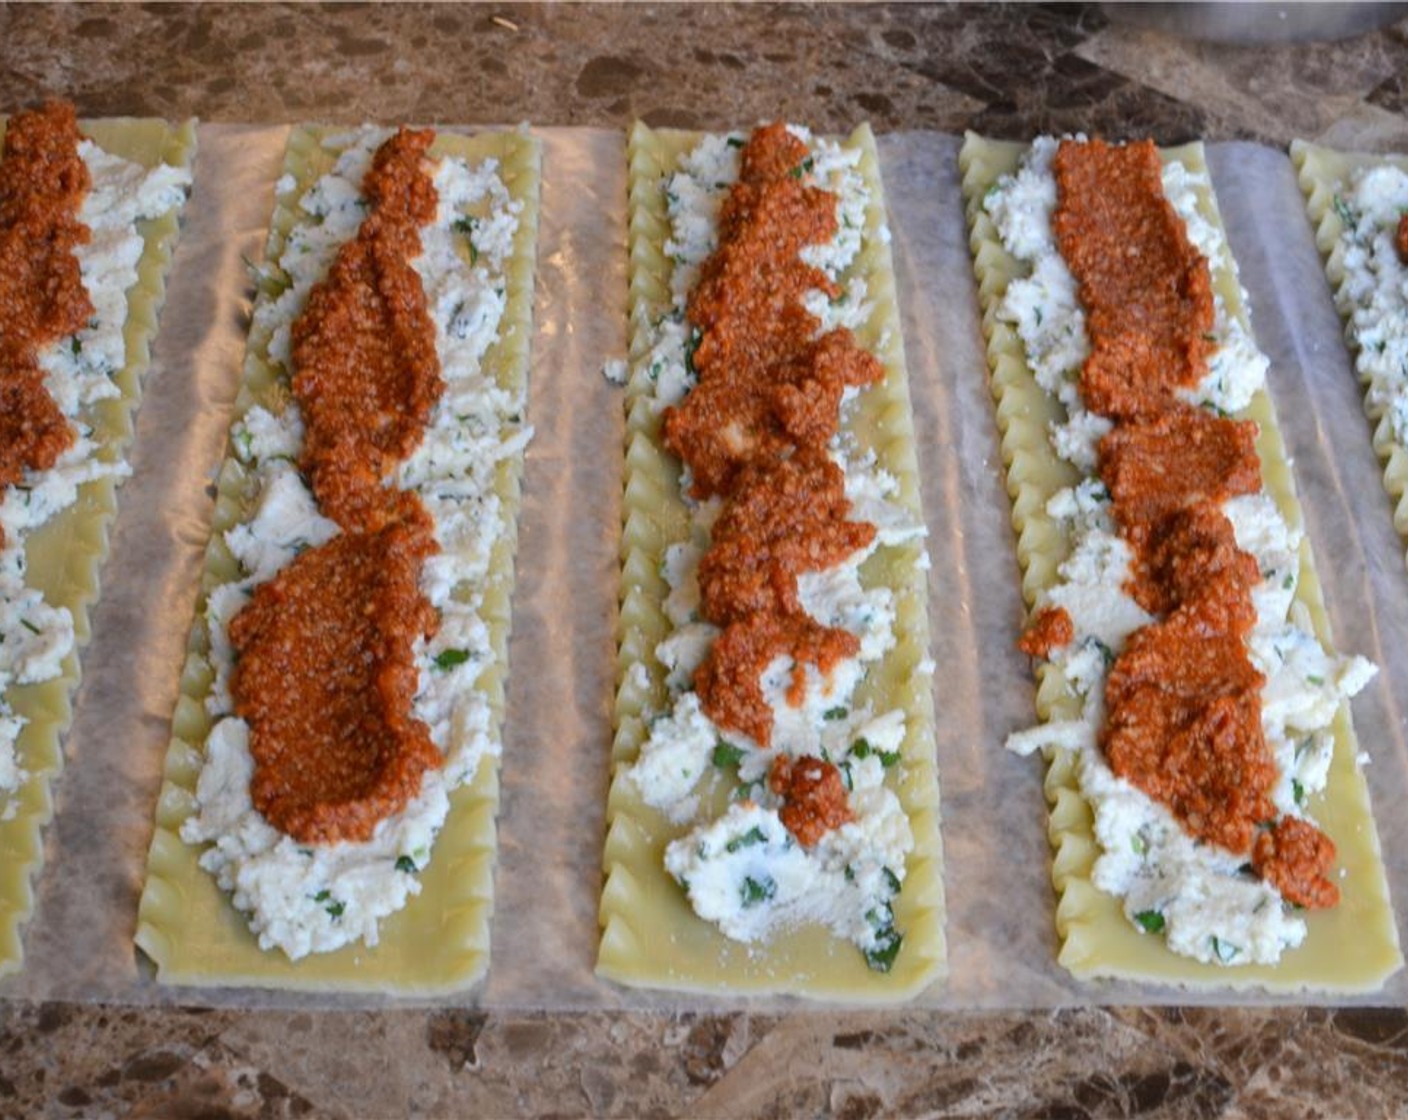 step 10 To assemble the lasagna rolls, lay the sheets out on parchment or wax paper. Spread the ricotta cheese mix along the sheets, then spoon some of the meat mix on each sheet as well.